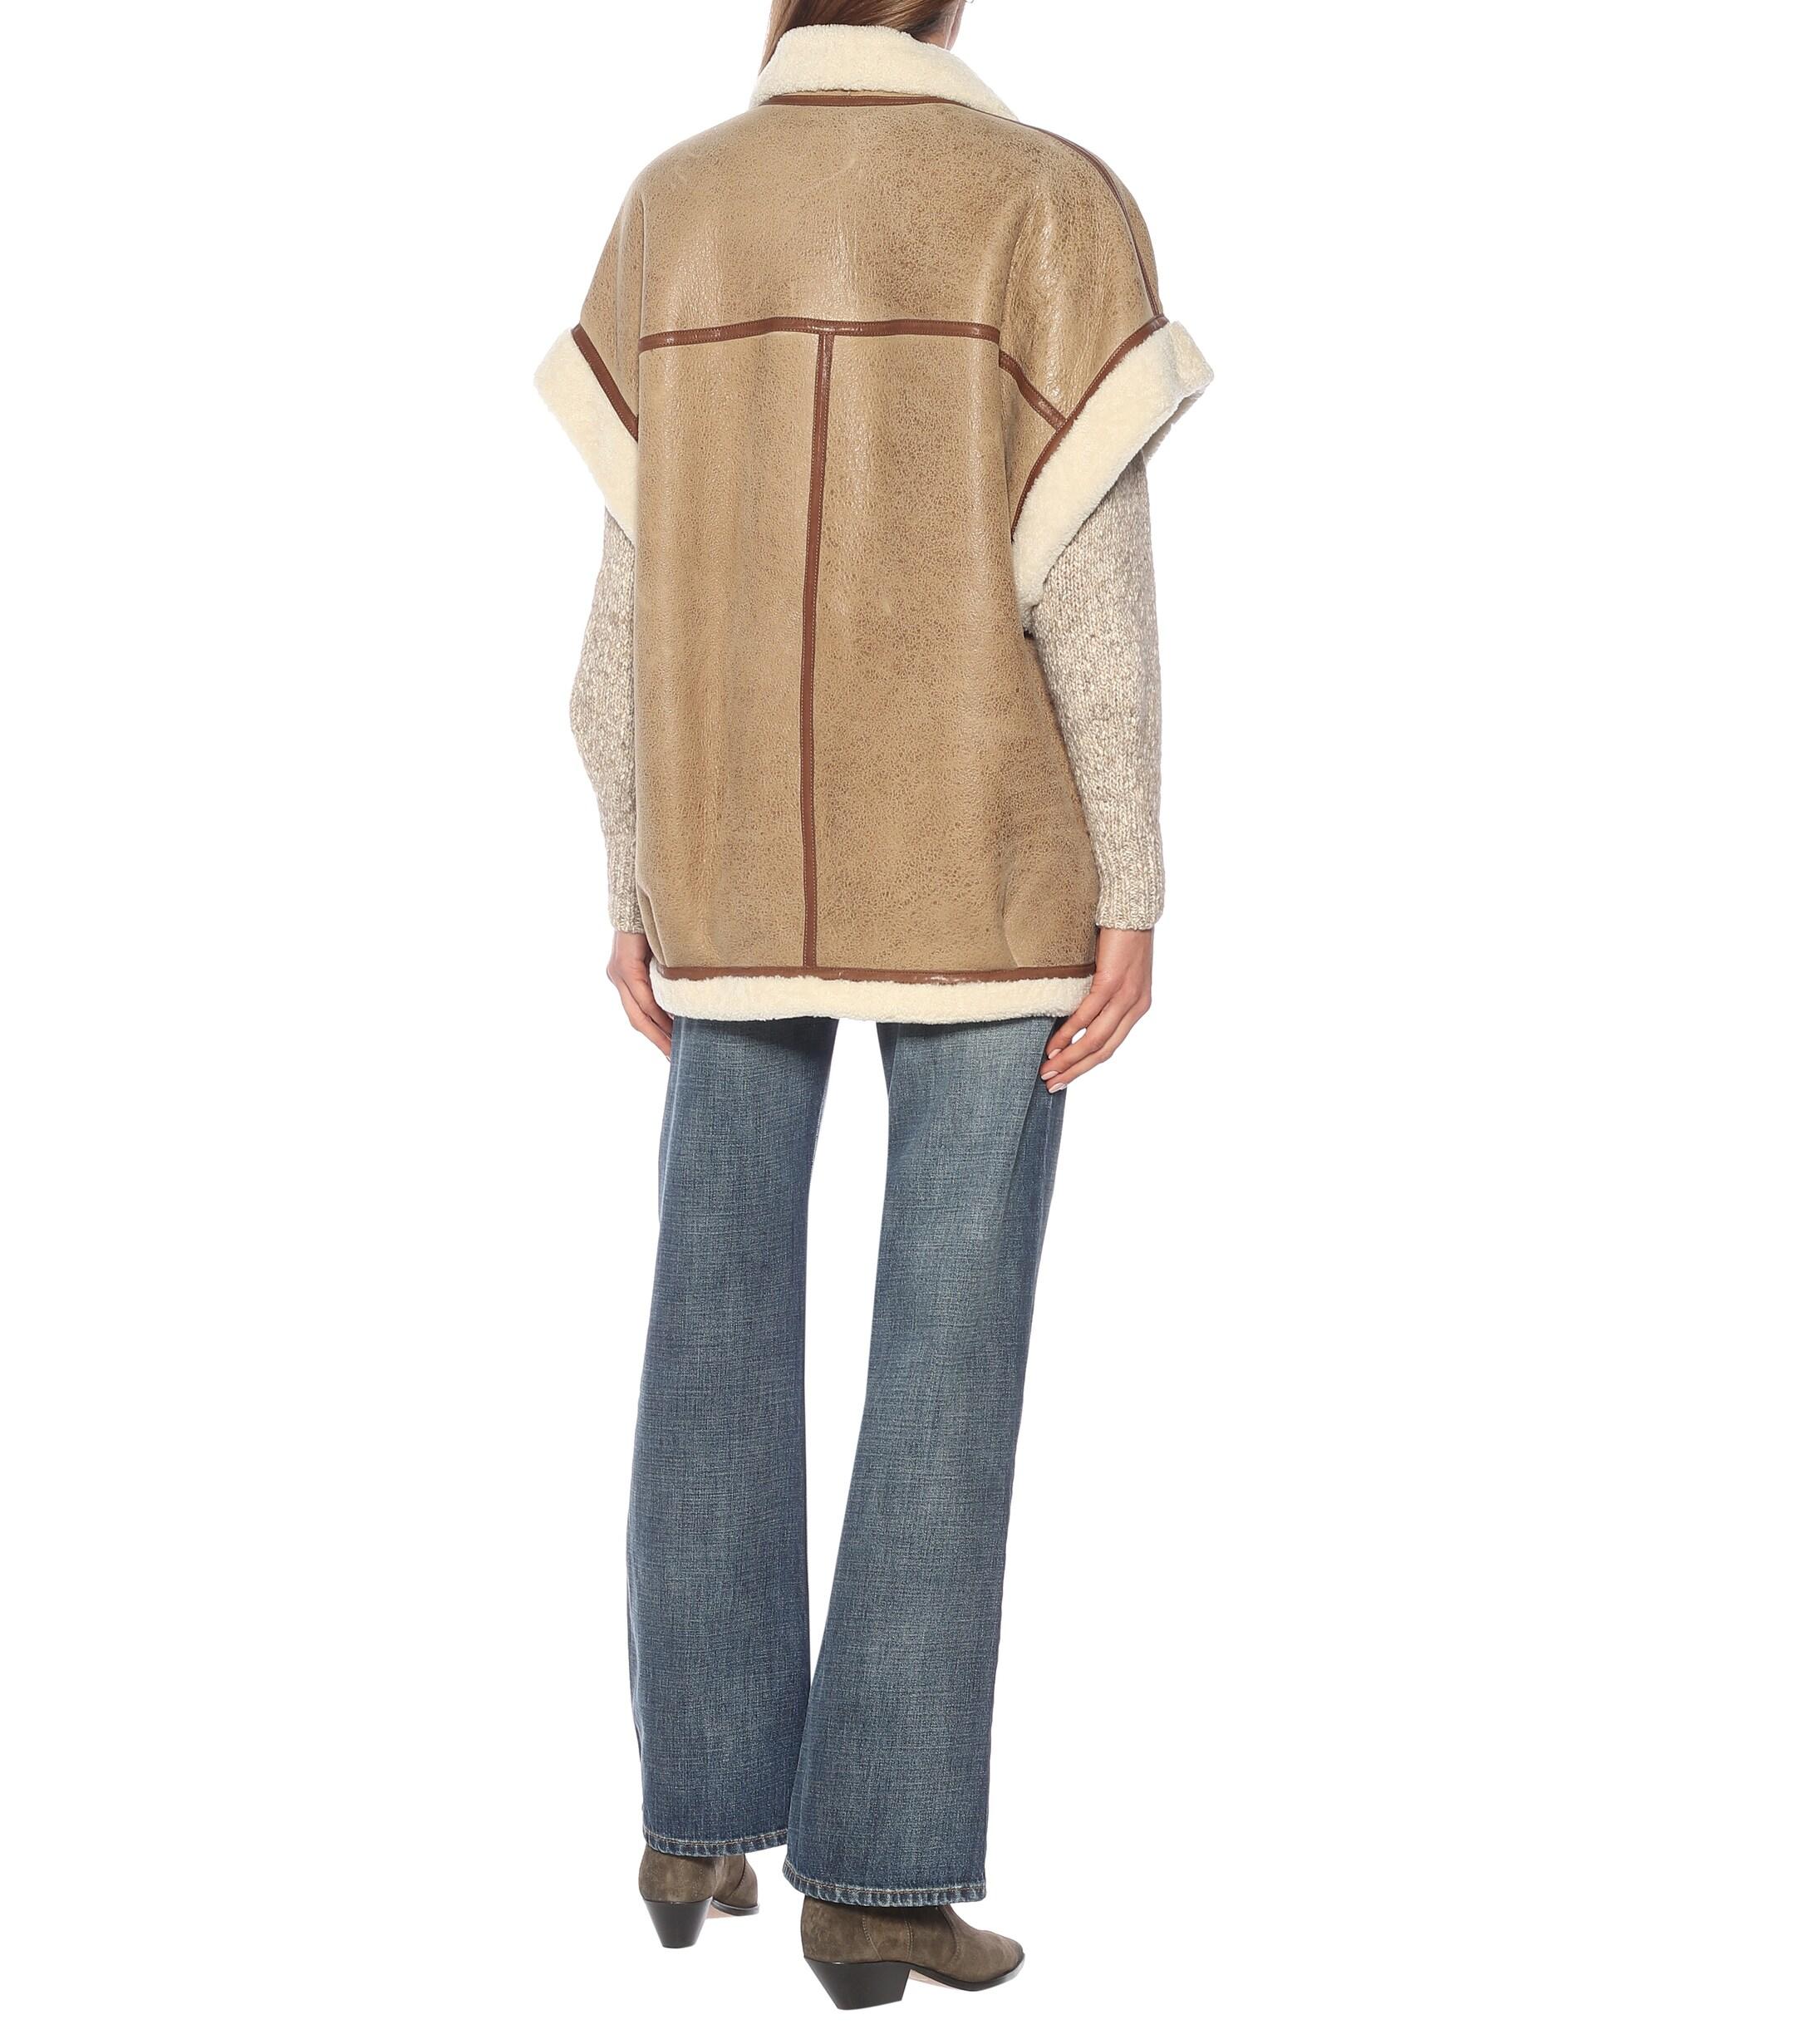 Étoile Isabel Marant Adelia Leather And Shearling Vest in Beige